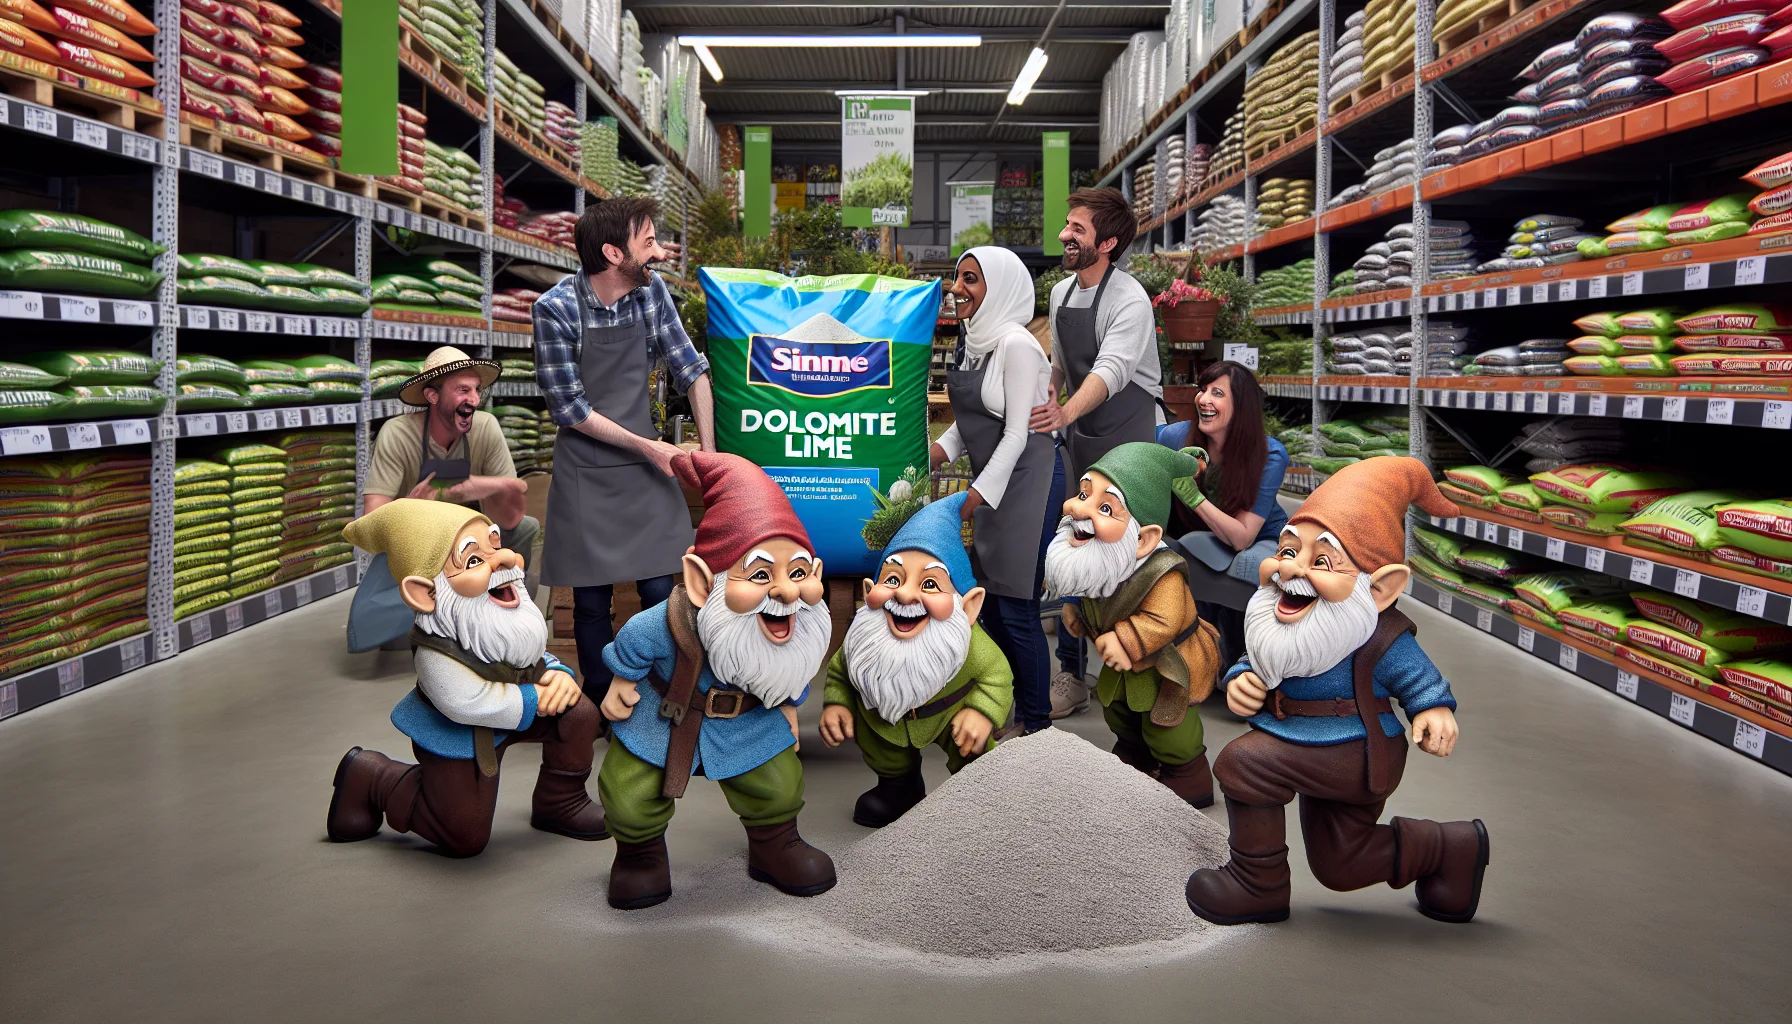 A fun and whimsical scene set in a hardware and garden supply store, similar to large home improvement retailers. In the center of the setting, a bag of dolomite lime, clearly marked and visible to the observer. Around it, an ensemble of cheerfully chatting garden gnomes, comically attempting to lift and shift bags of soil and lime, playfully encouraging shoppers to try gardening. A Middle-Eastern woman and a Caucasian man, both donning gardening hats, gloves, and aprons, are both laughing at the sight and joining in the mischief. The overall atmosphere is light-hearted, promoting a joyous and engaging gardening experience.